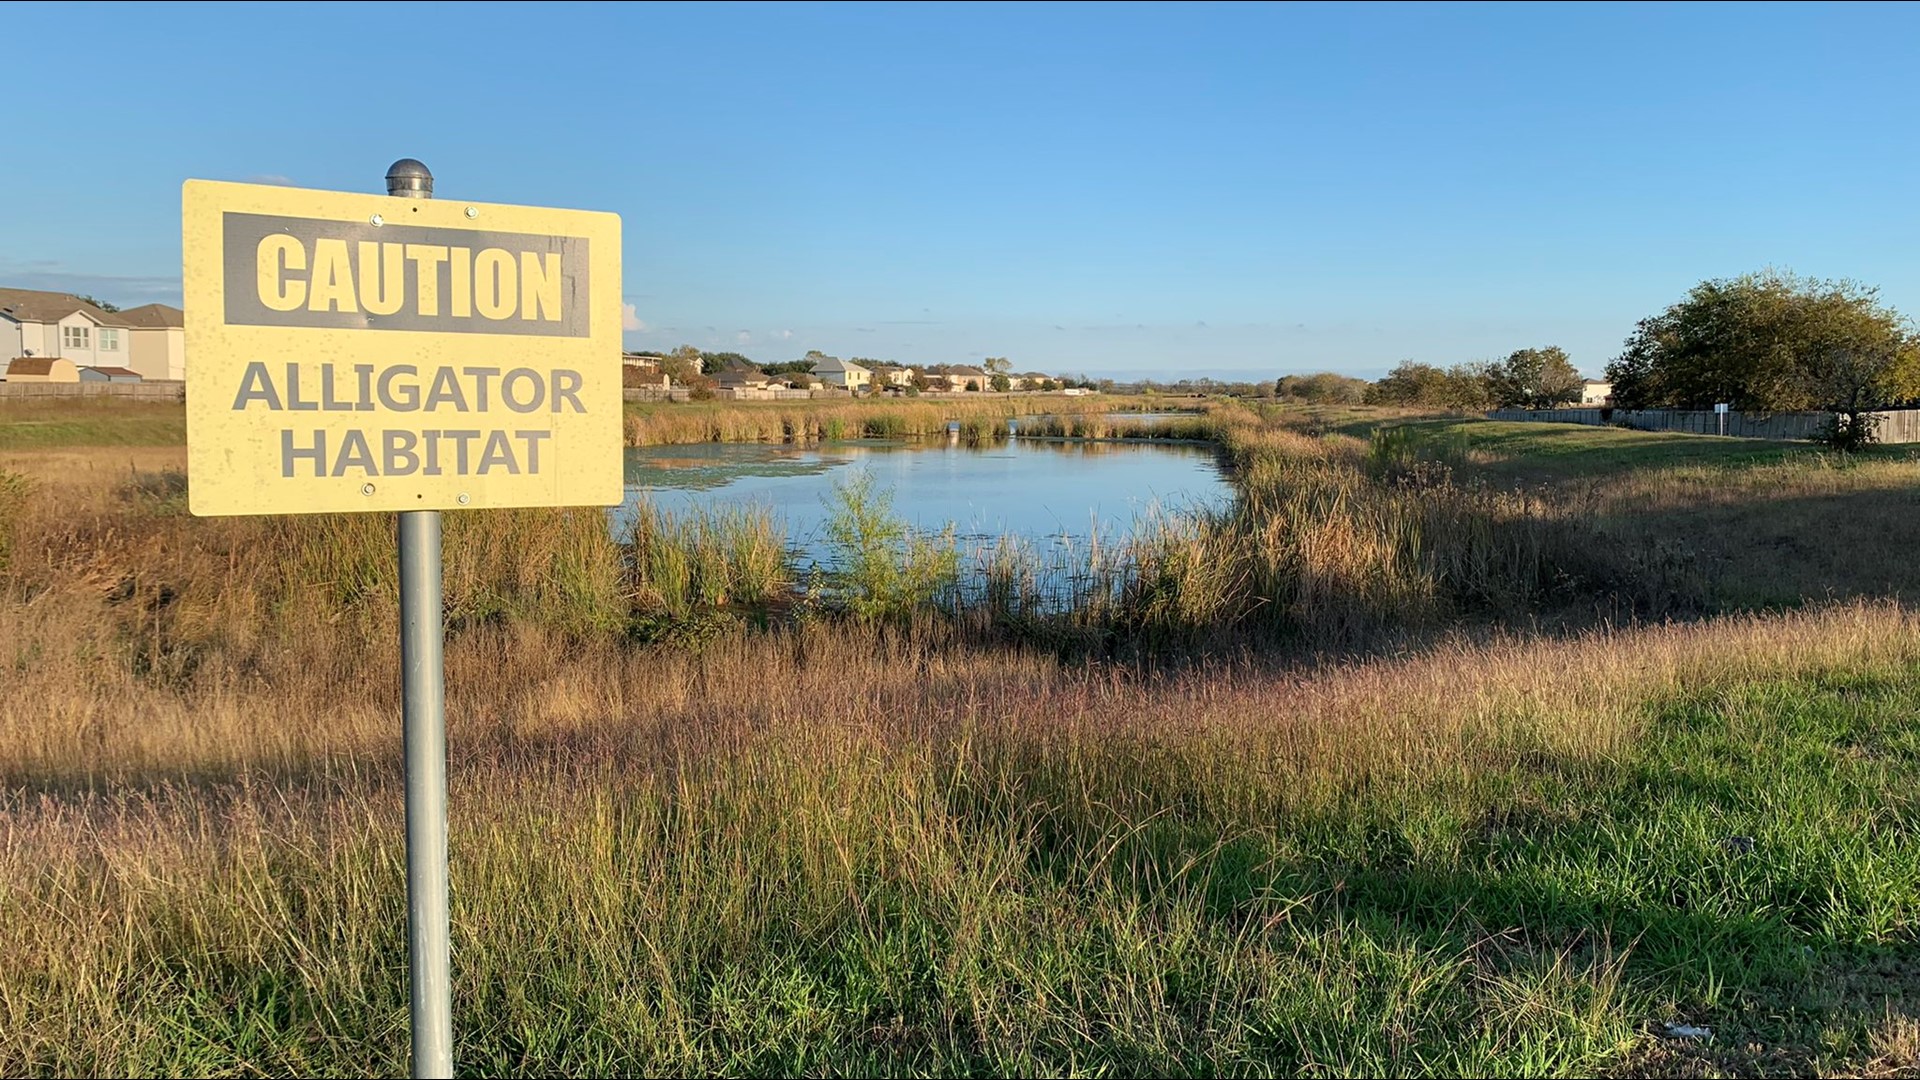 TPWD game wardens found evidence of alligators living in a Del Valle retention pond, but could not prove they attacked a pet.